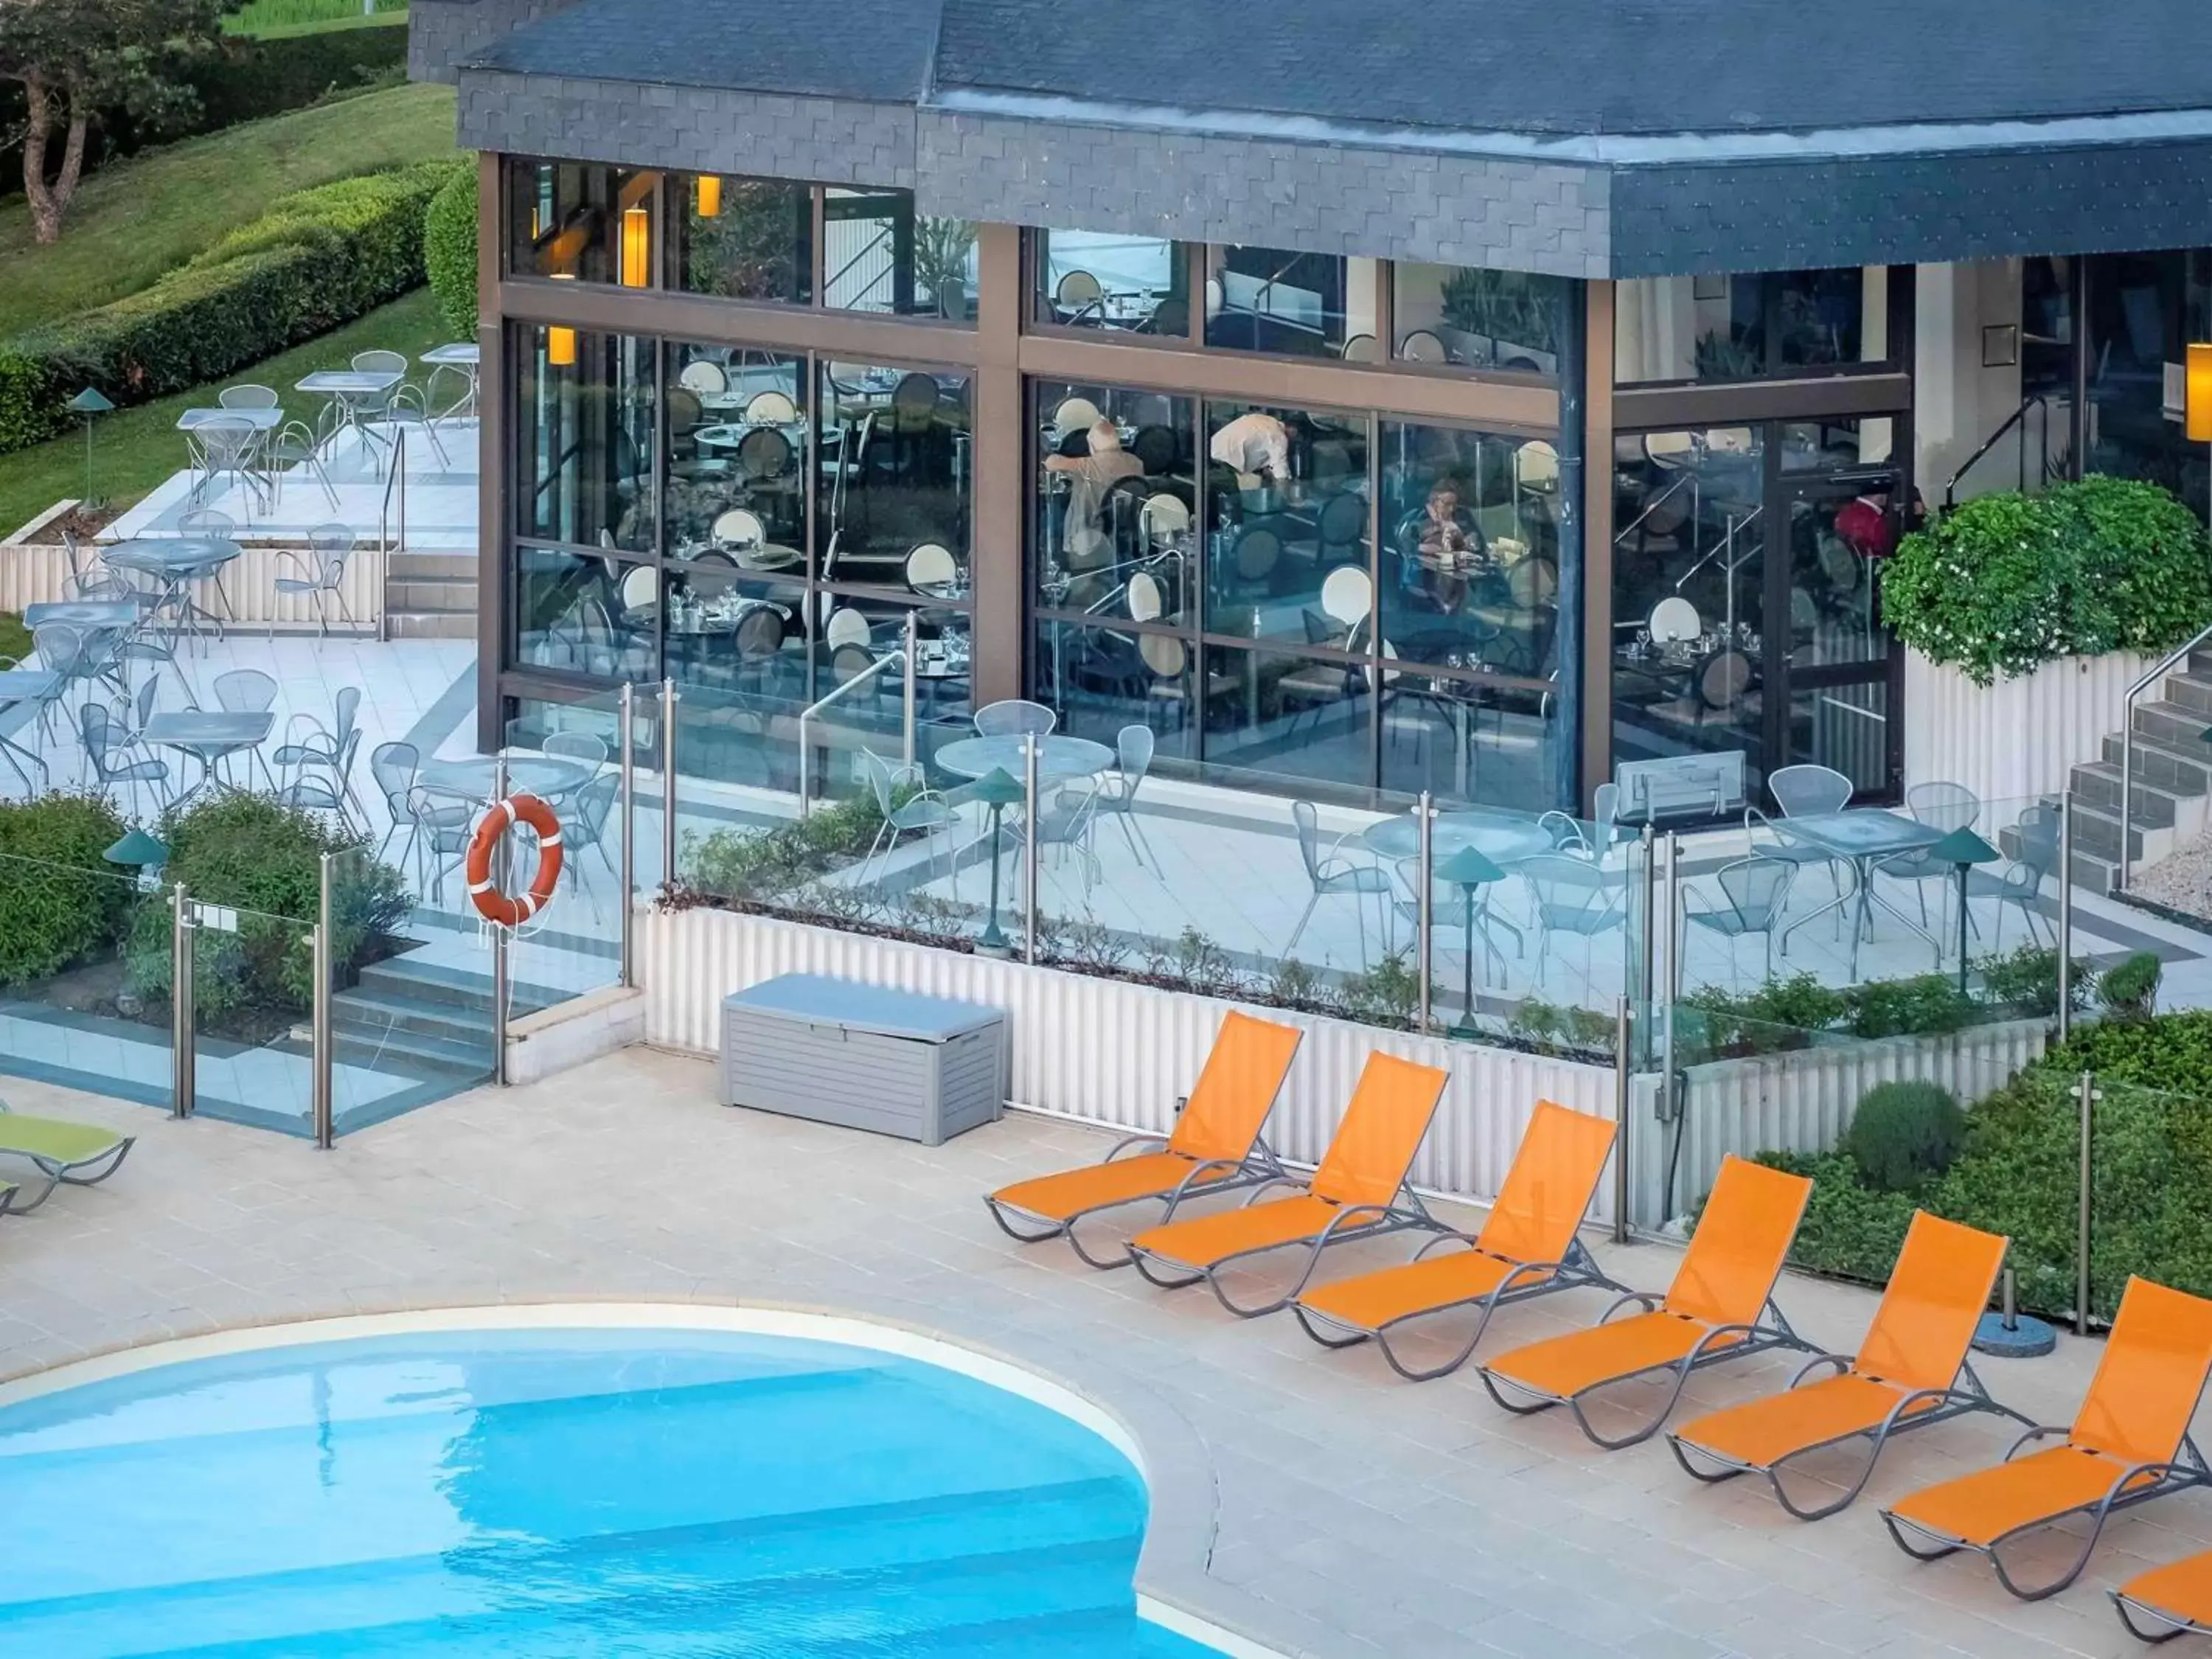 On site, Swimming Pool in Novotel Amboise